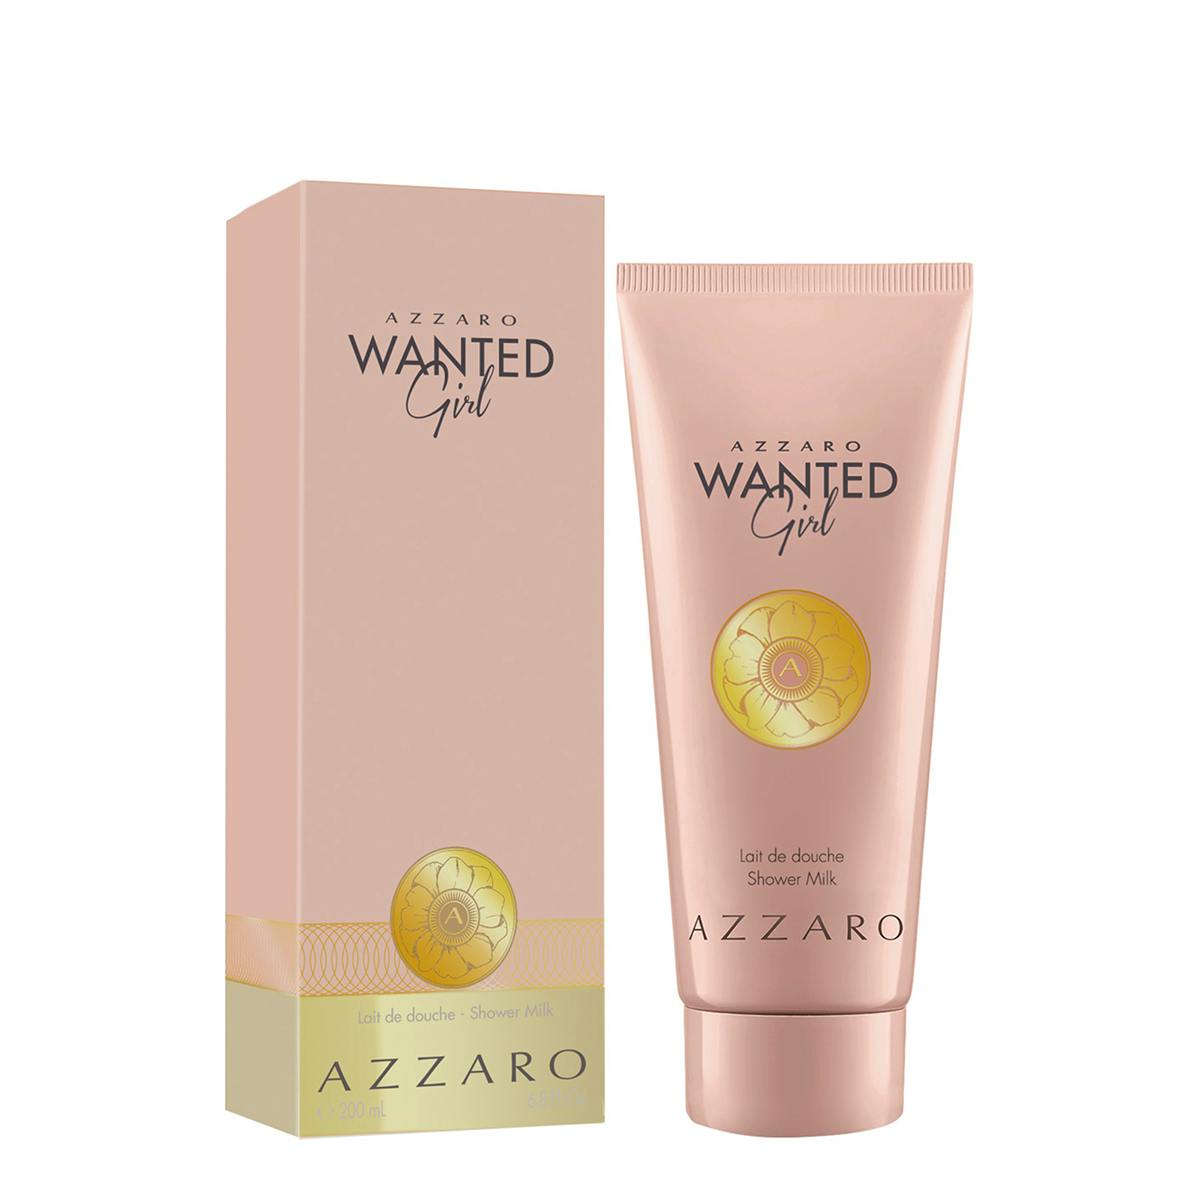 Azzaro Wanted Girl Shower Milk 200ml Body Products